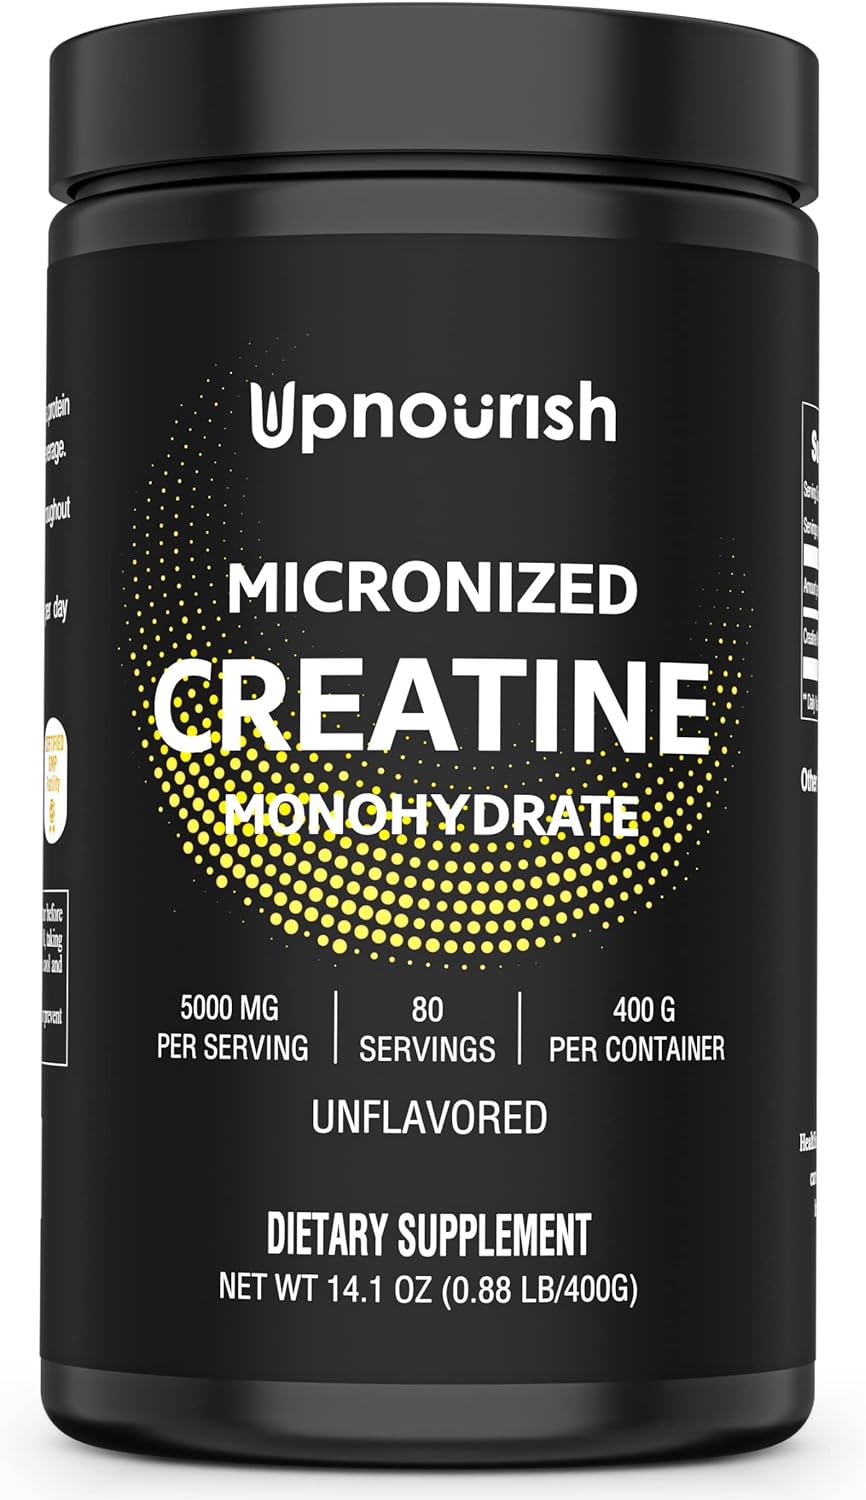 UpNourish Micronized Creatine Monohydrate Powder 400 G - Unflavored Vegan for Pre Workout, Muscle Building Pure Women and Men Instantized Supplement, 80 Servings 14.1096 Ounce